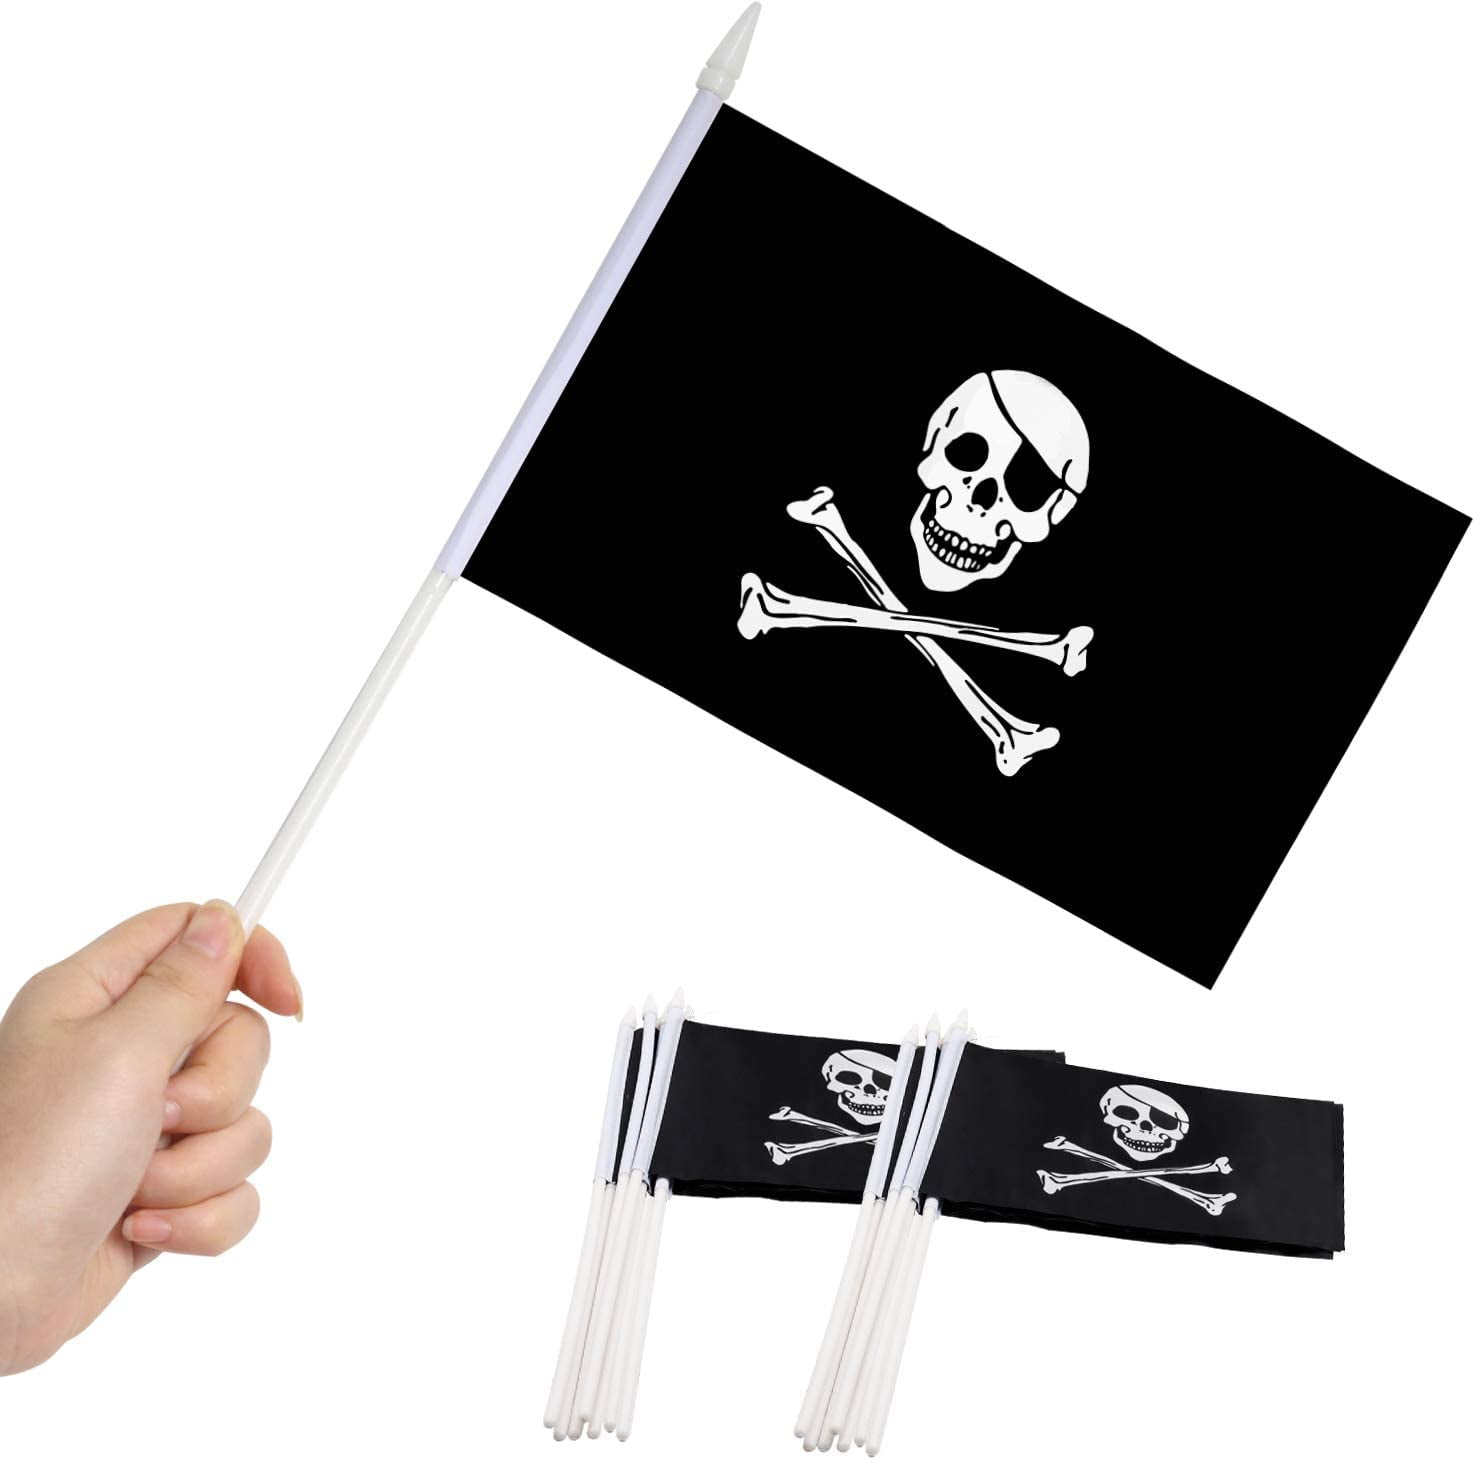 3x5 Jolly Roger Pirate Eye Patch 2 Faced 2-ply Wind Resistant Flag 3x5ft